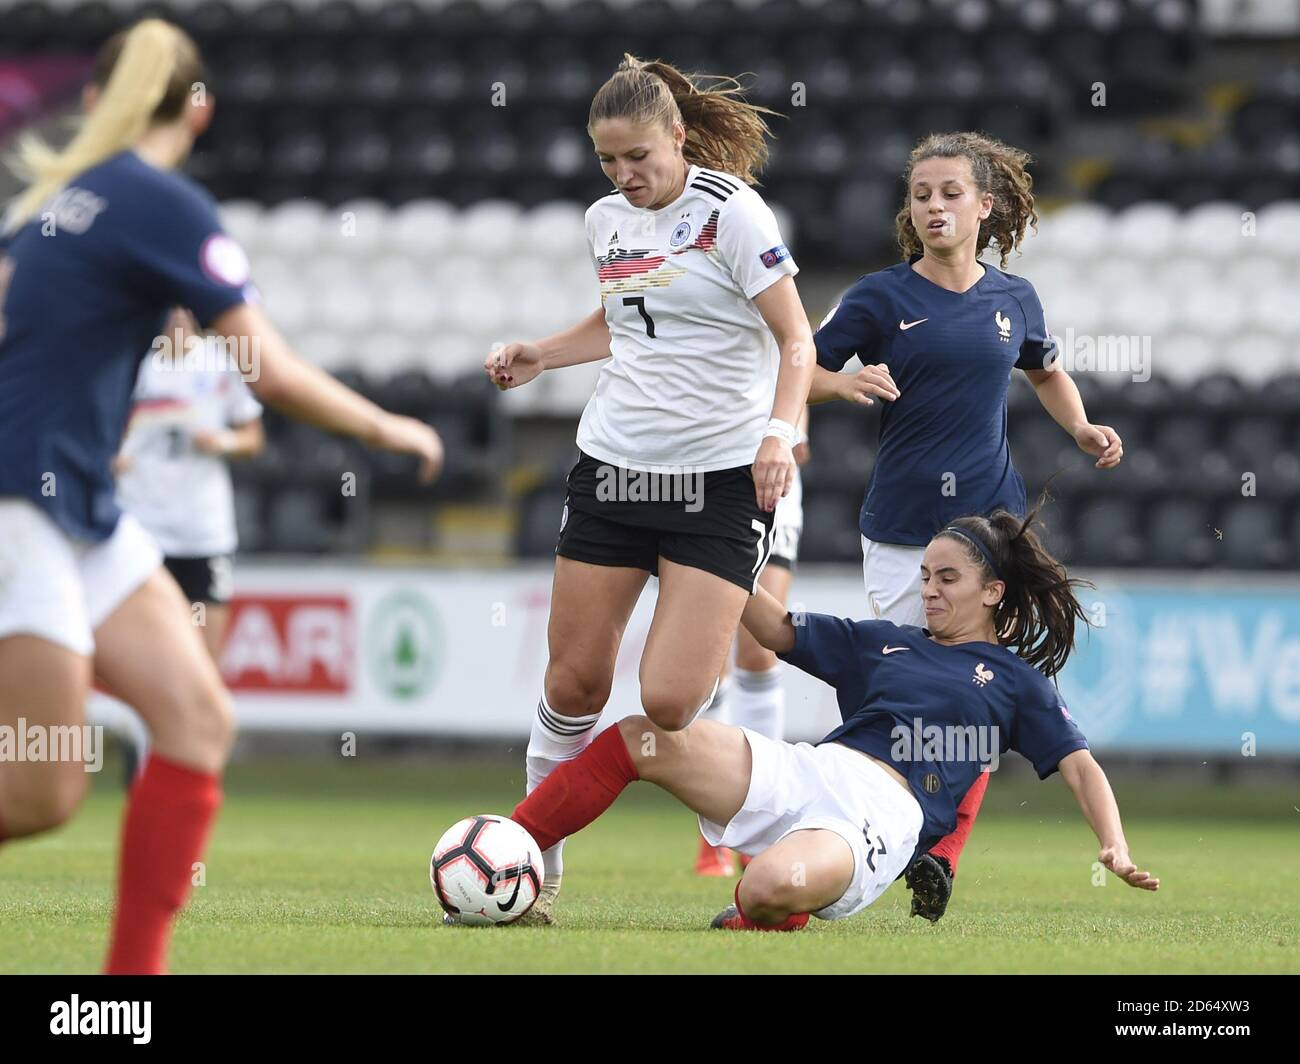 Germany's Melissa Kossler is tackled by France's Manon Revelli during the UEFA Women's Under 19 Championship - Final Stock Photo